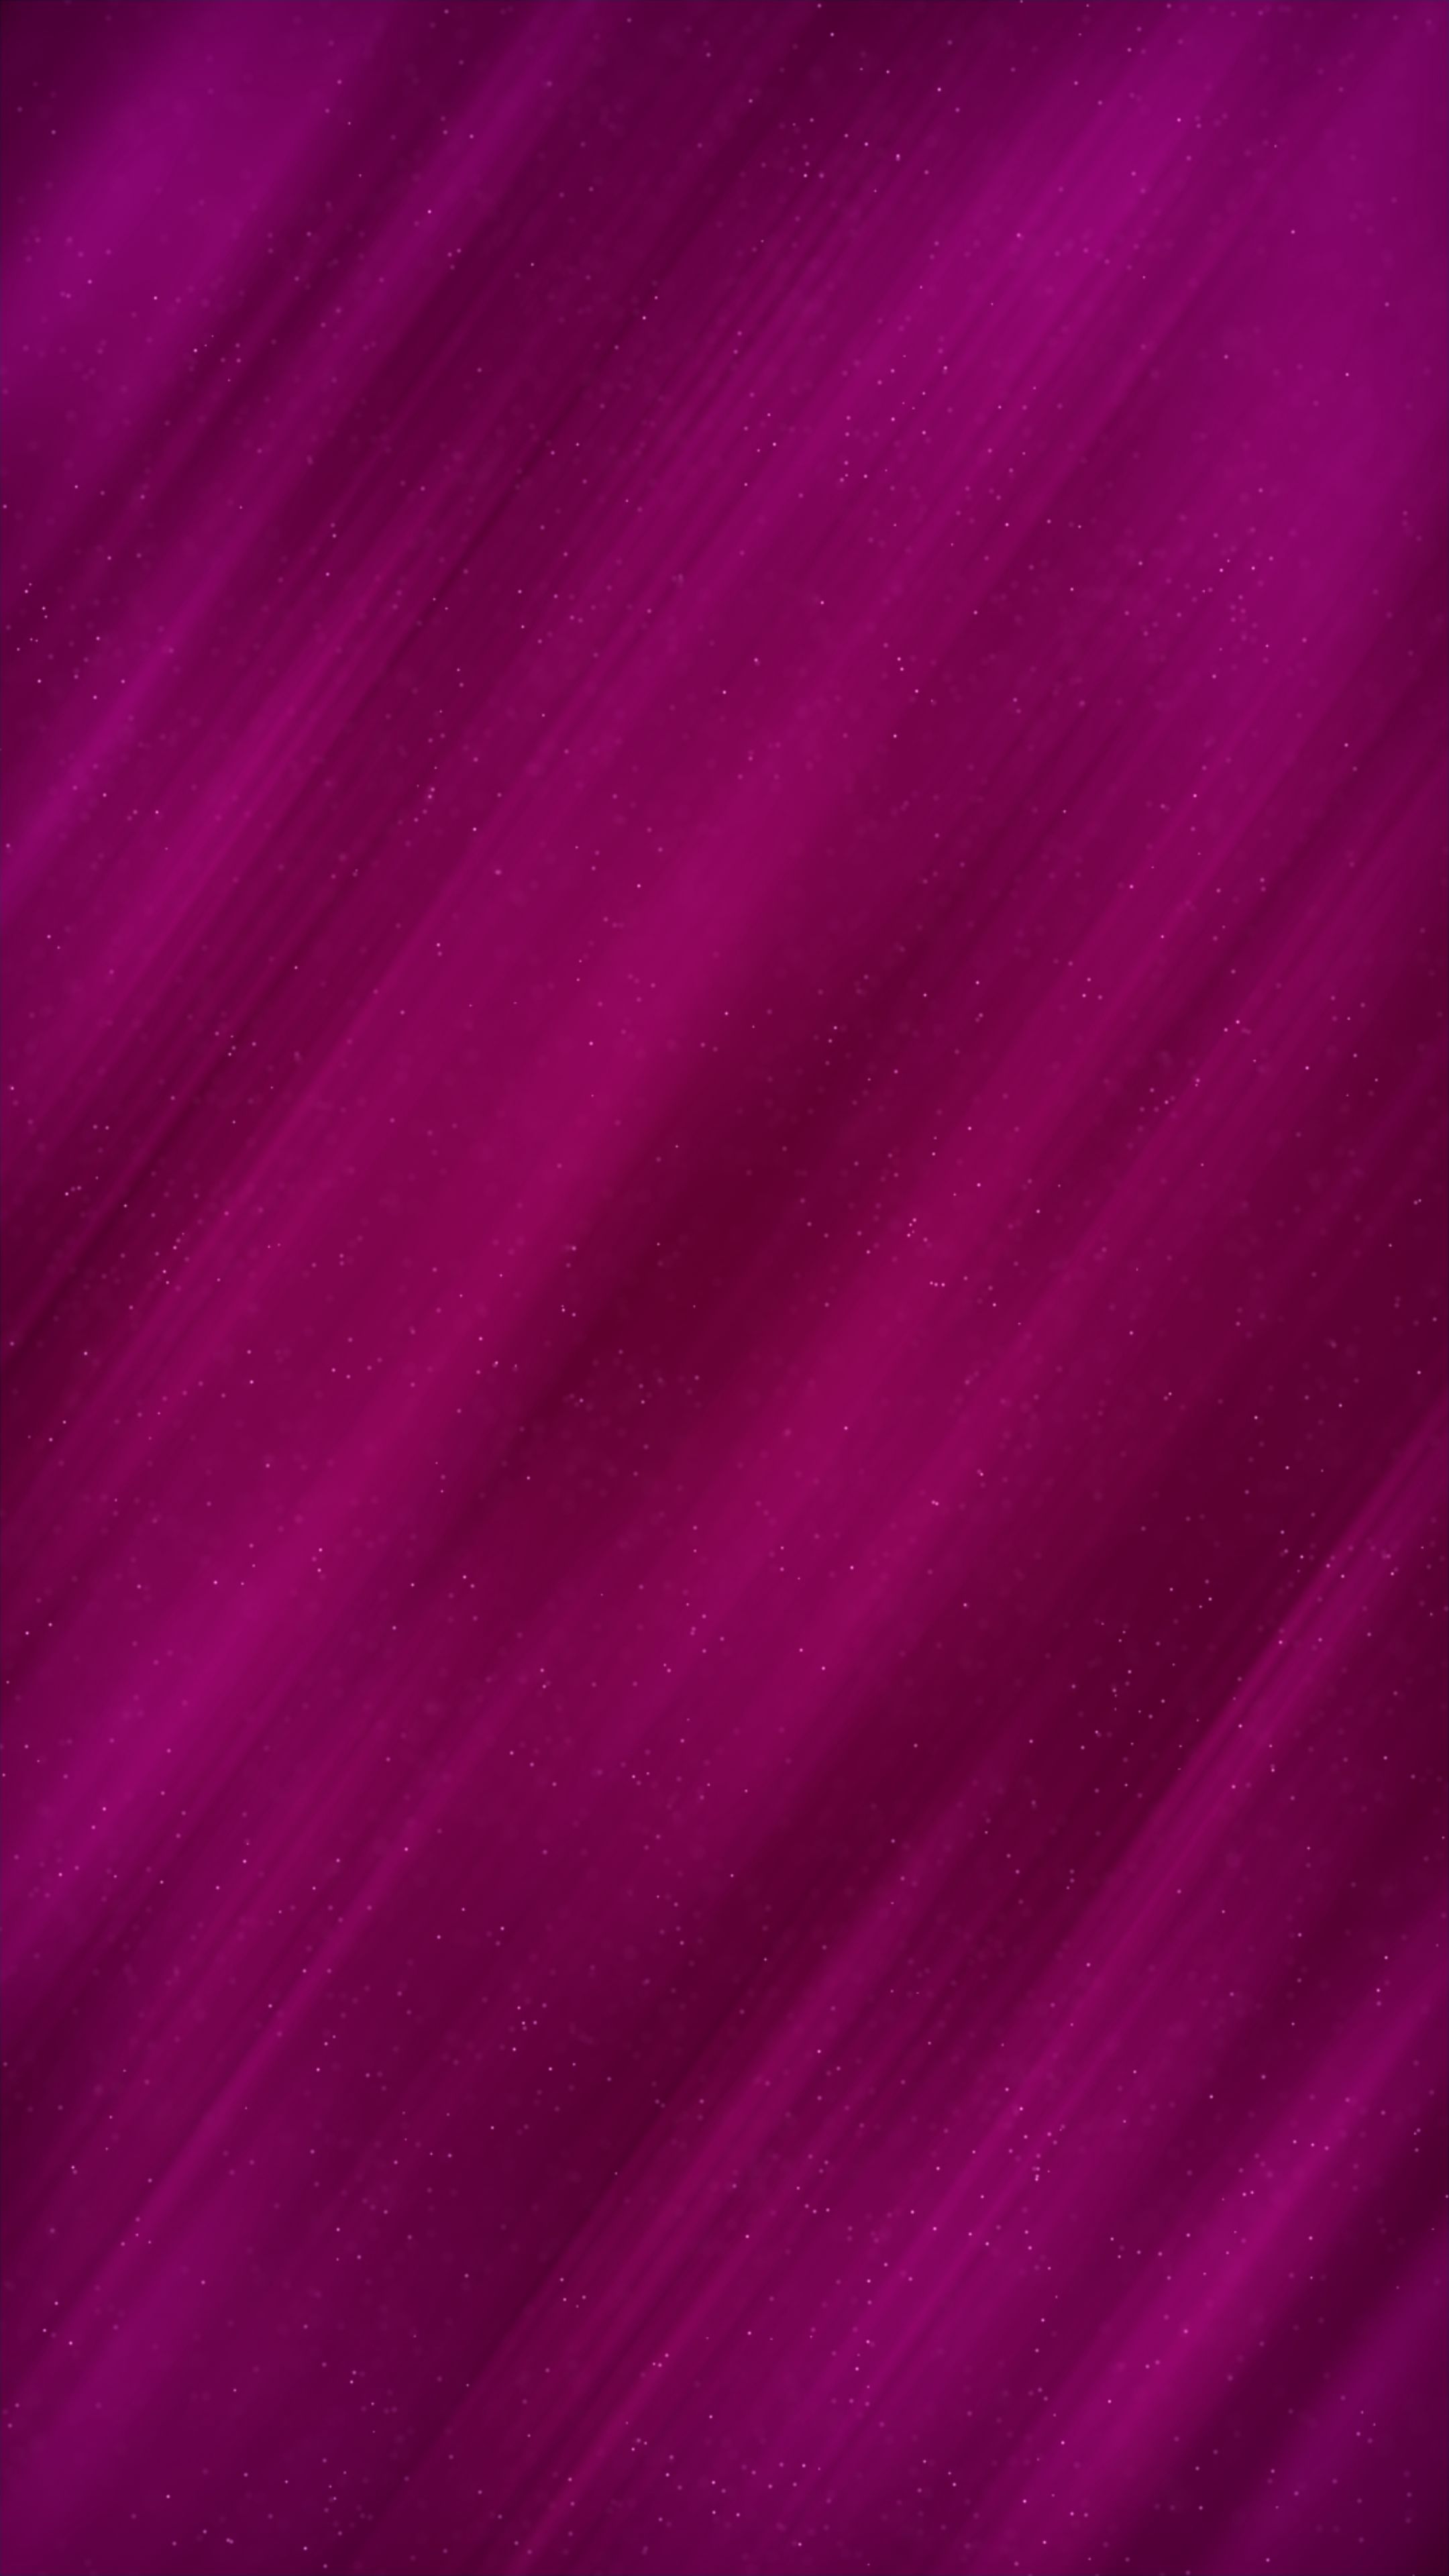 Horizontal Wallpaper obliquely, abstract, background, violet, texture, textures, purple, shades